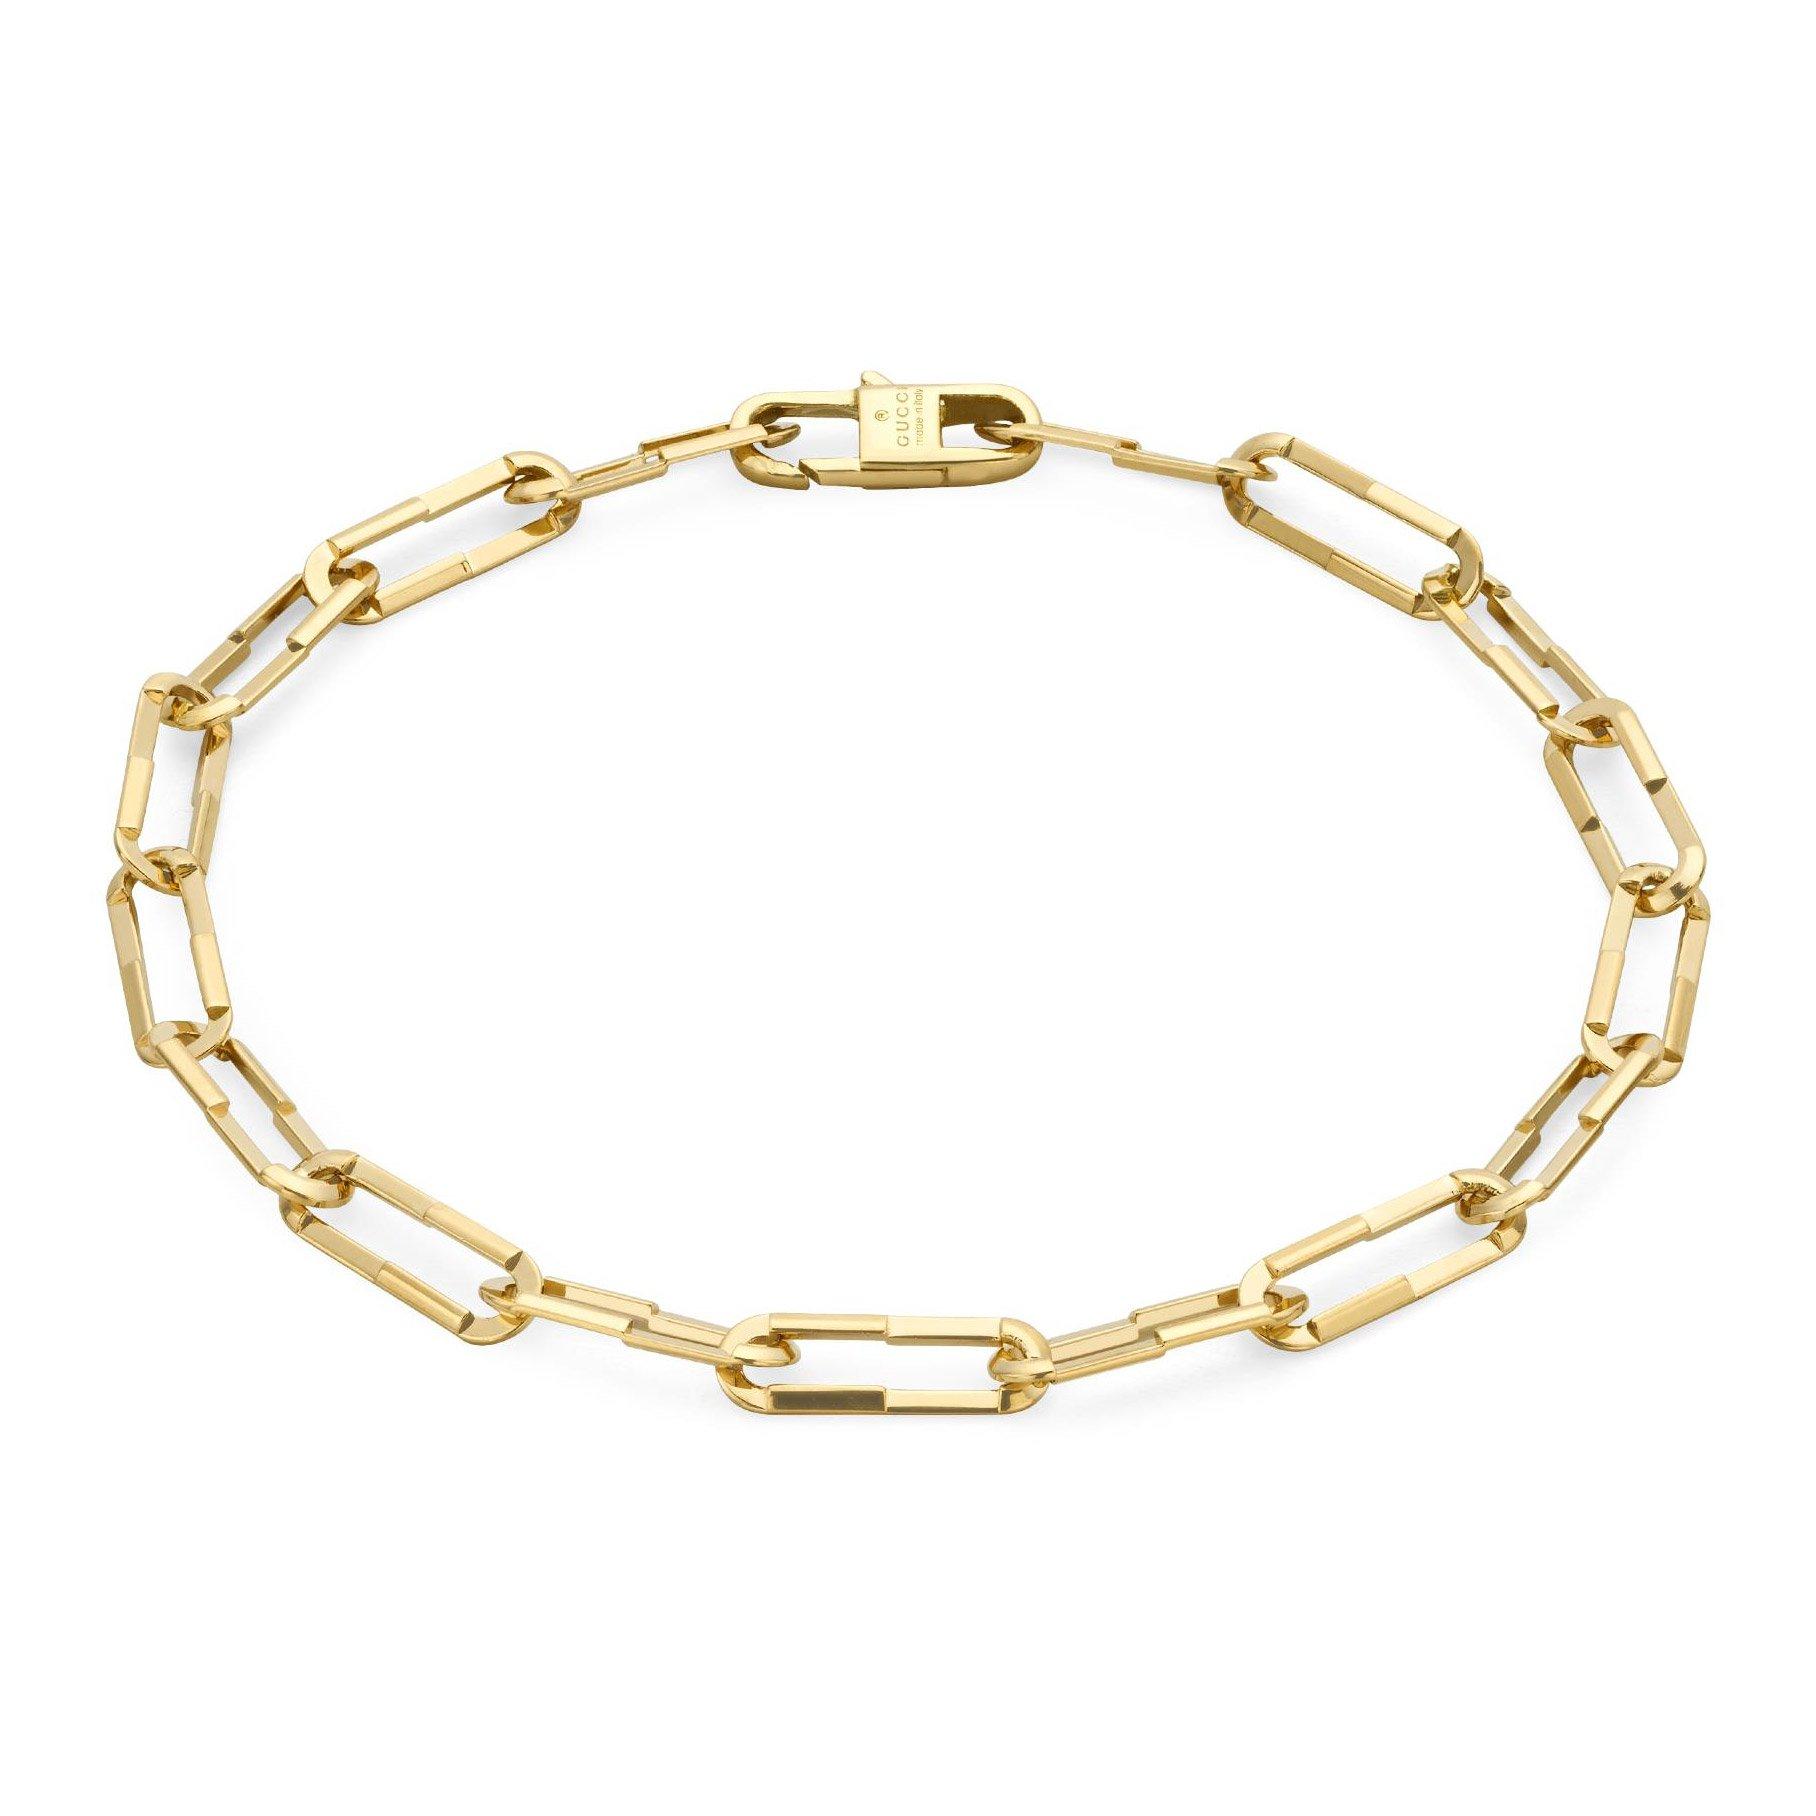 Gucci Link to Love 18ct Yellow Gold Bracelet | 0136610 | Beaverbrooks ...